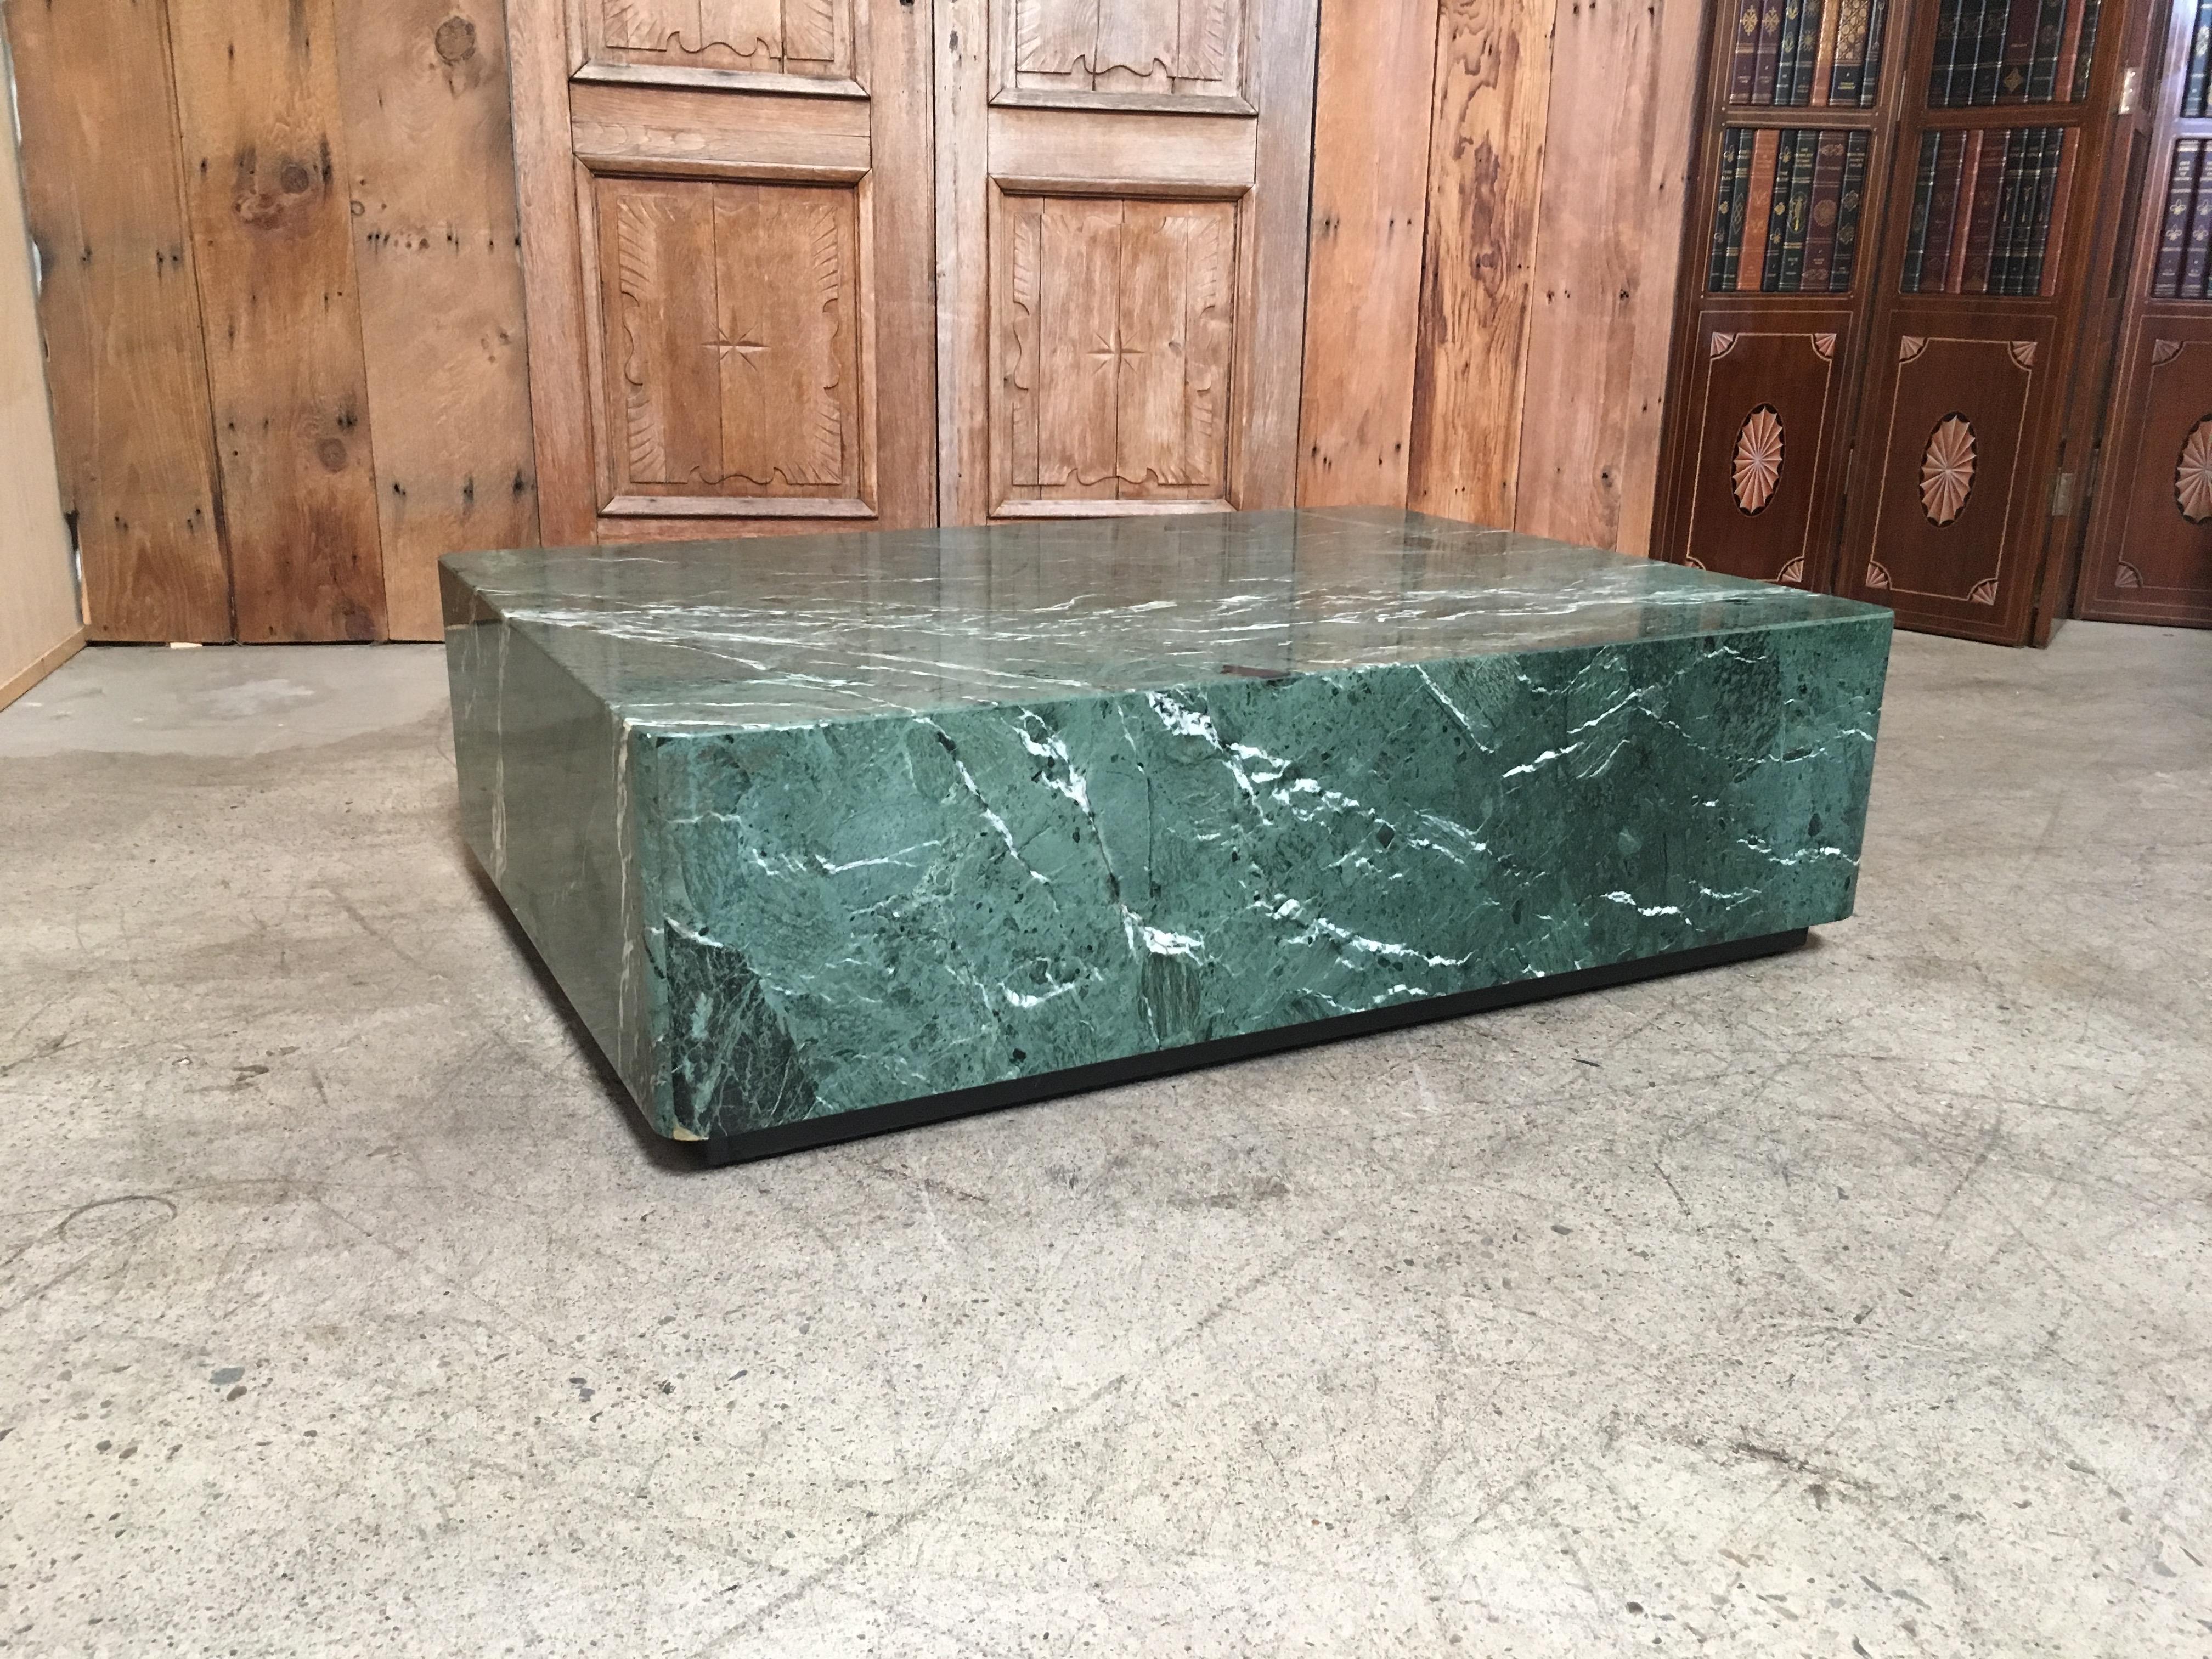 Emerald Green marble modern coffee table with ebonized wood plinth and casters for easy mobility.